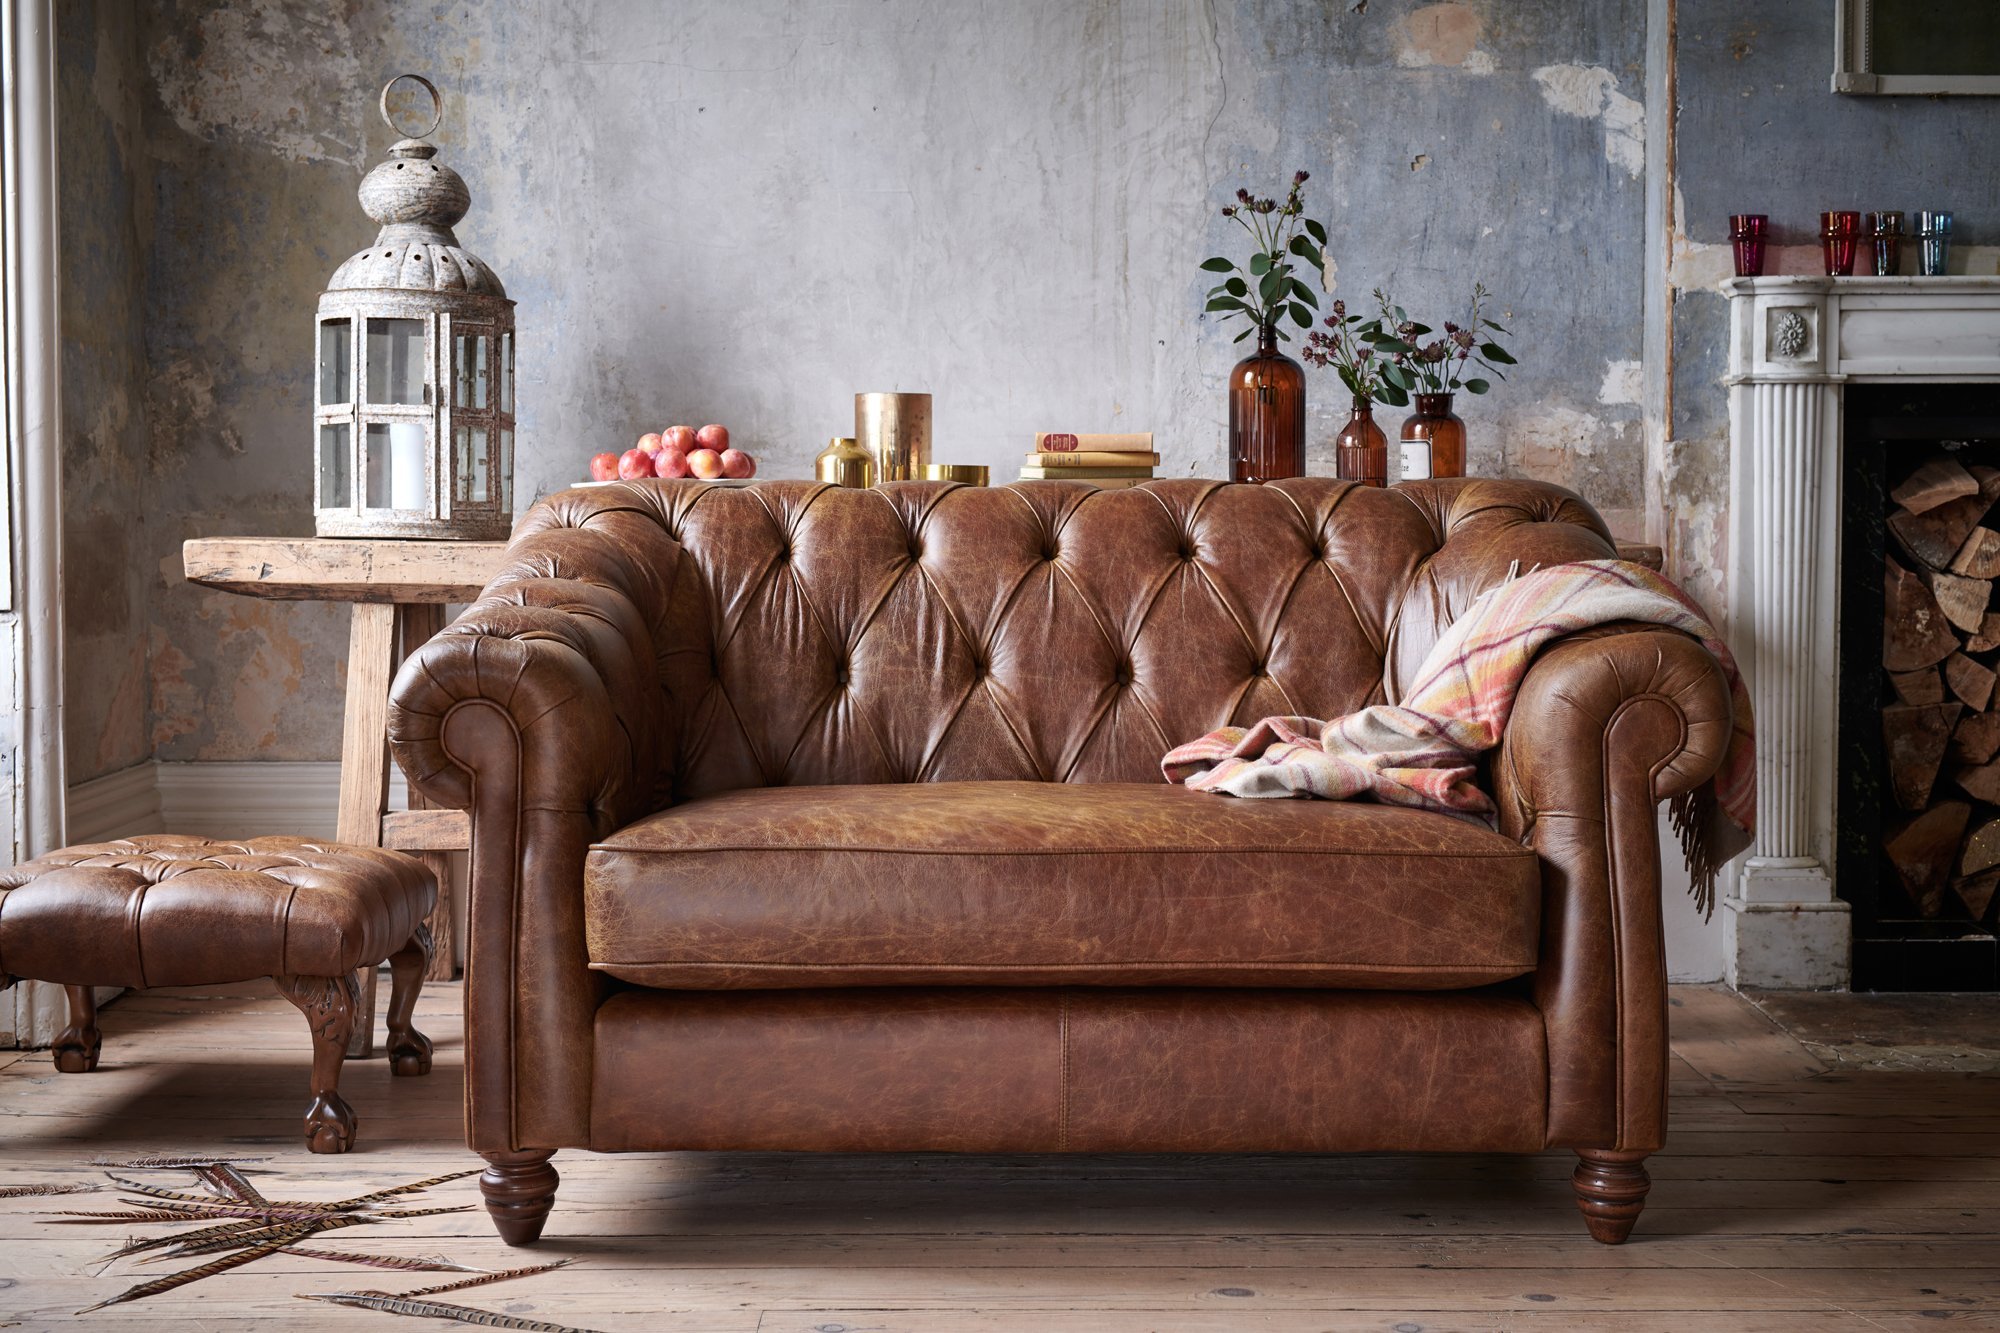 Tips To Keep Your Leather Sofa Looking, How To Put Shine Back On Leather Sofa